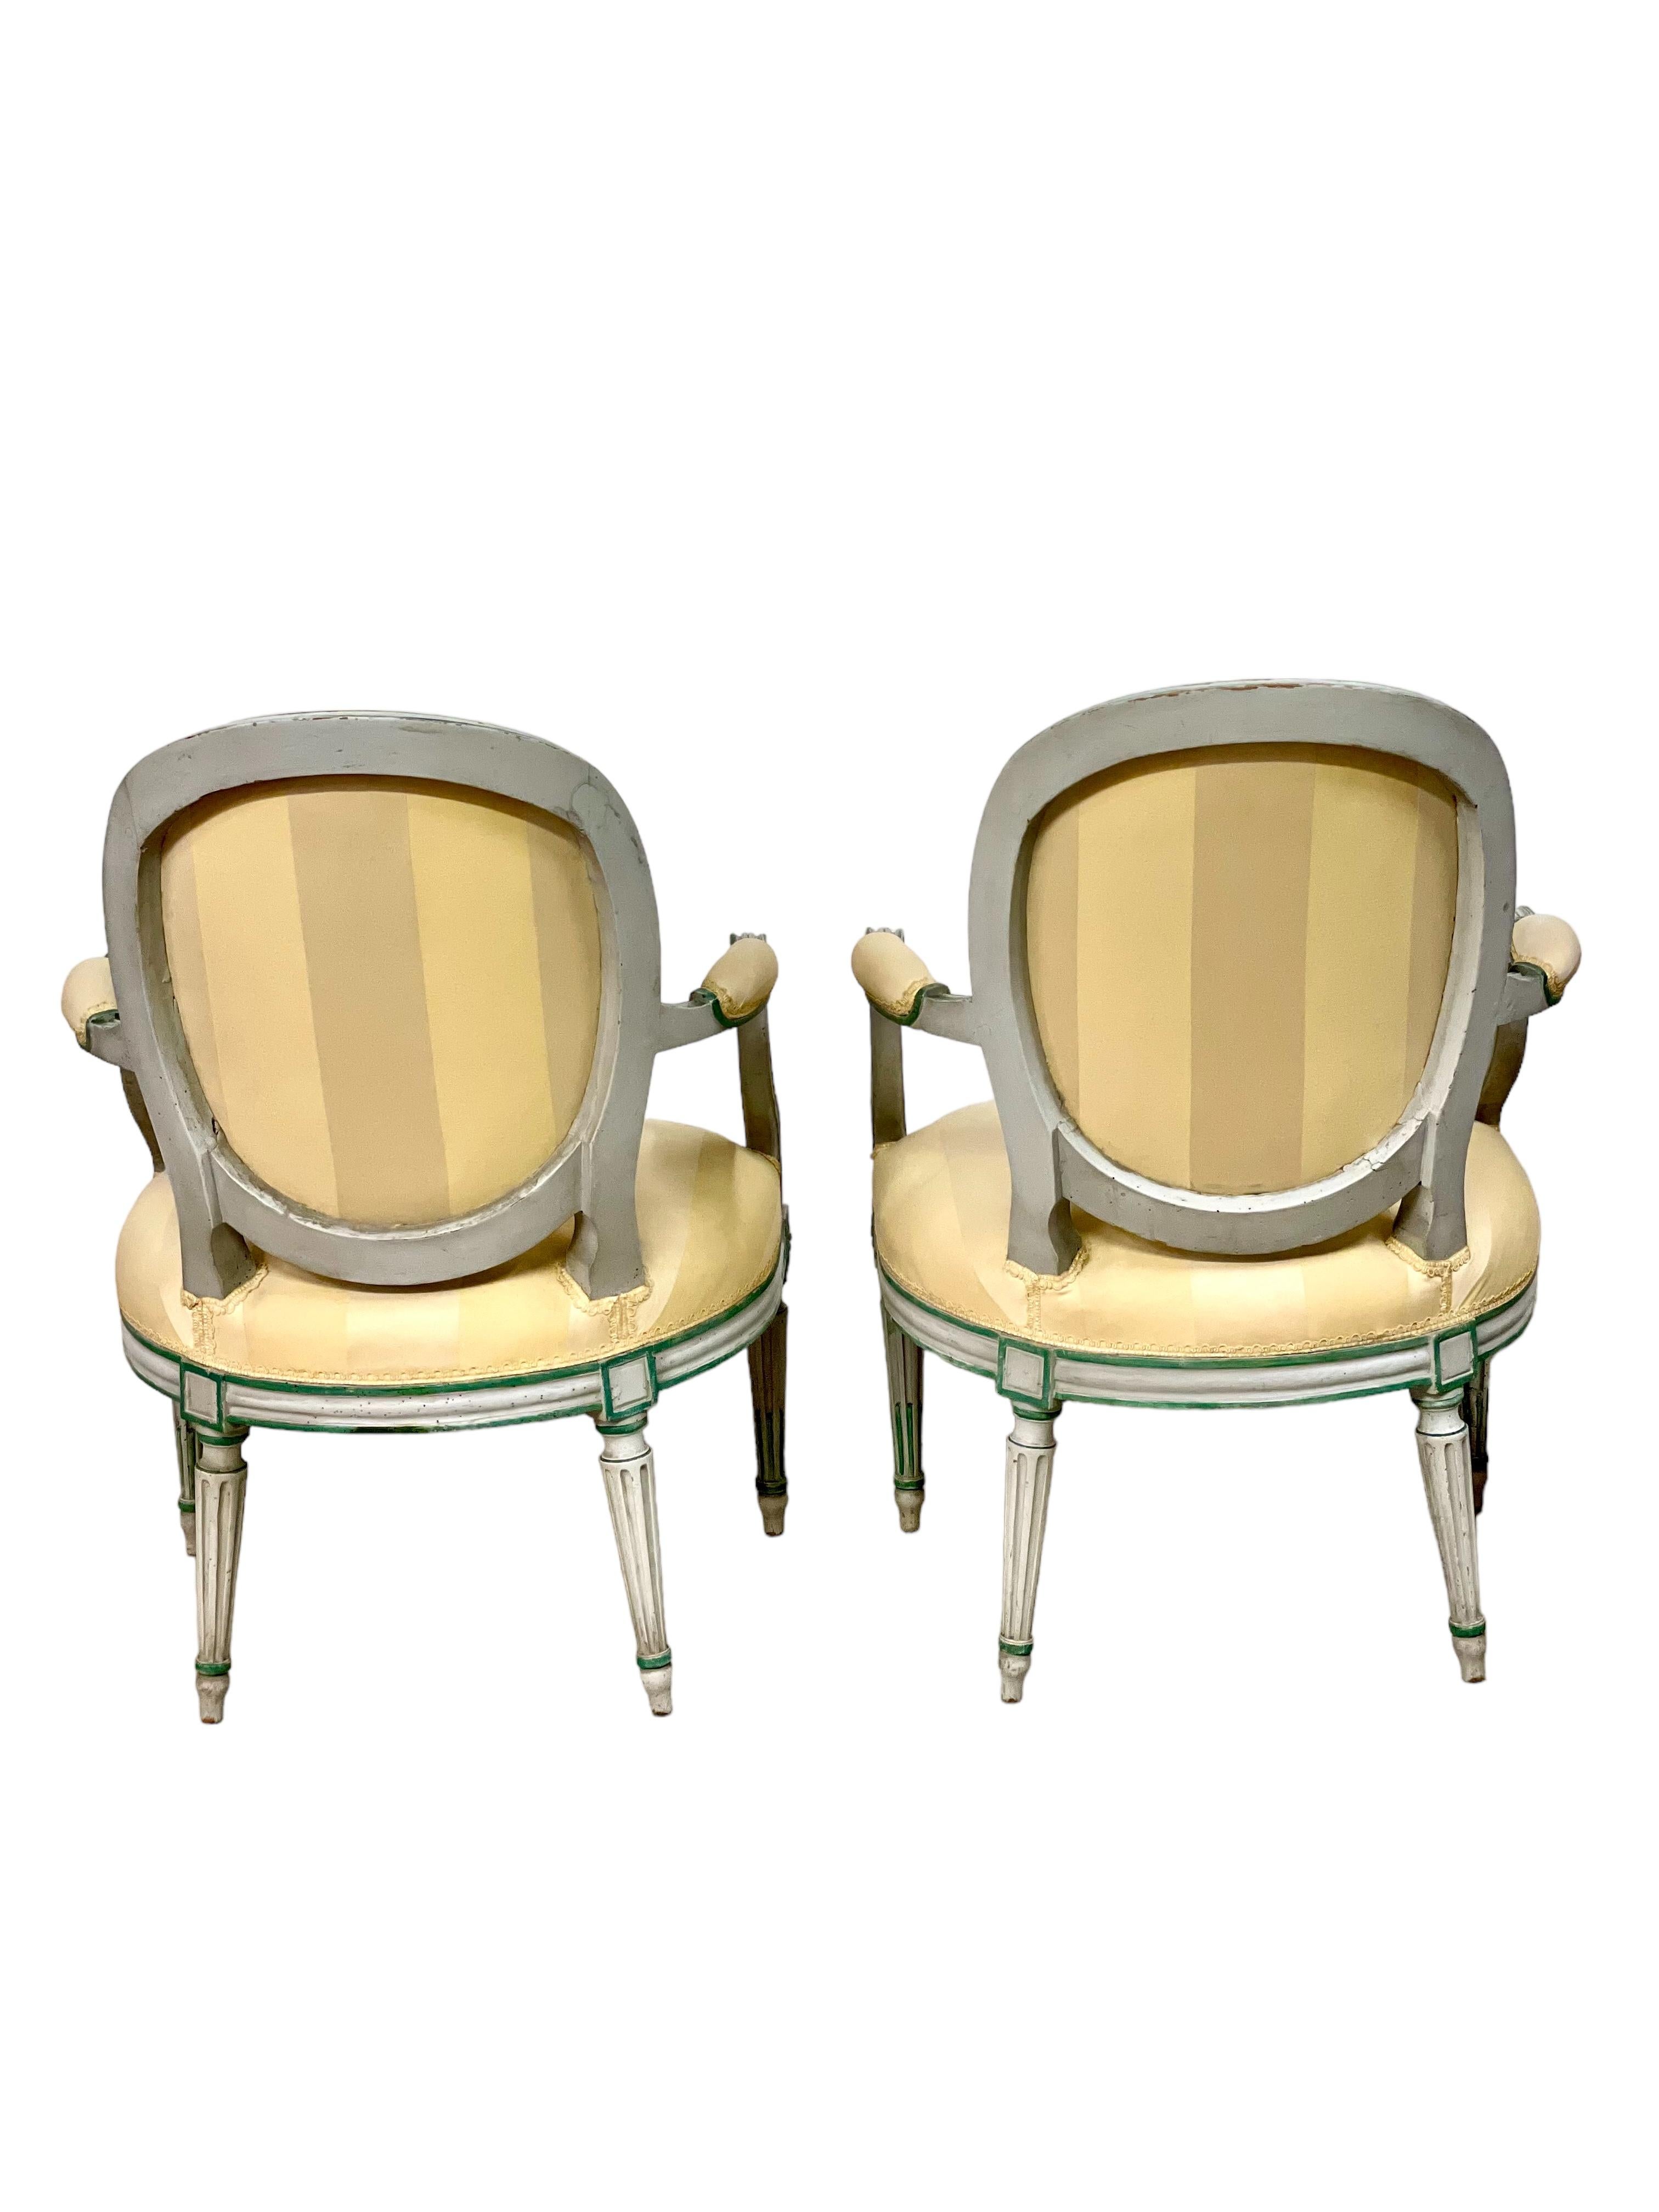 French Louis XVI Period Pair of Cabriolet Médaillon Armchairs 18th Century For Sale